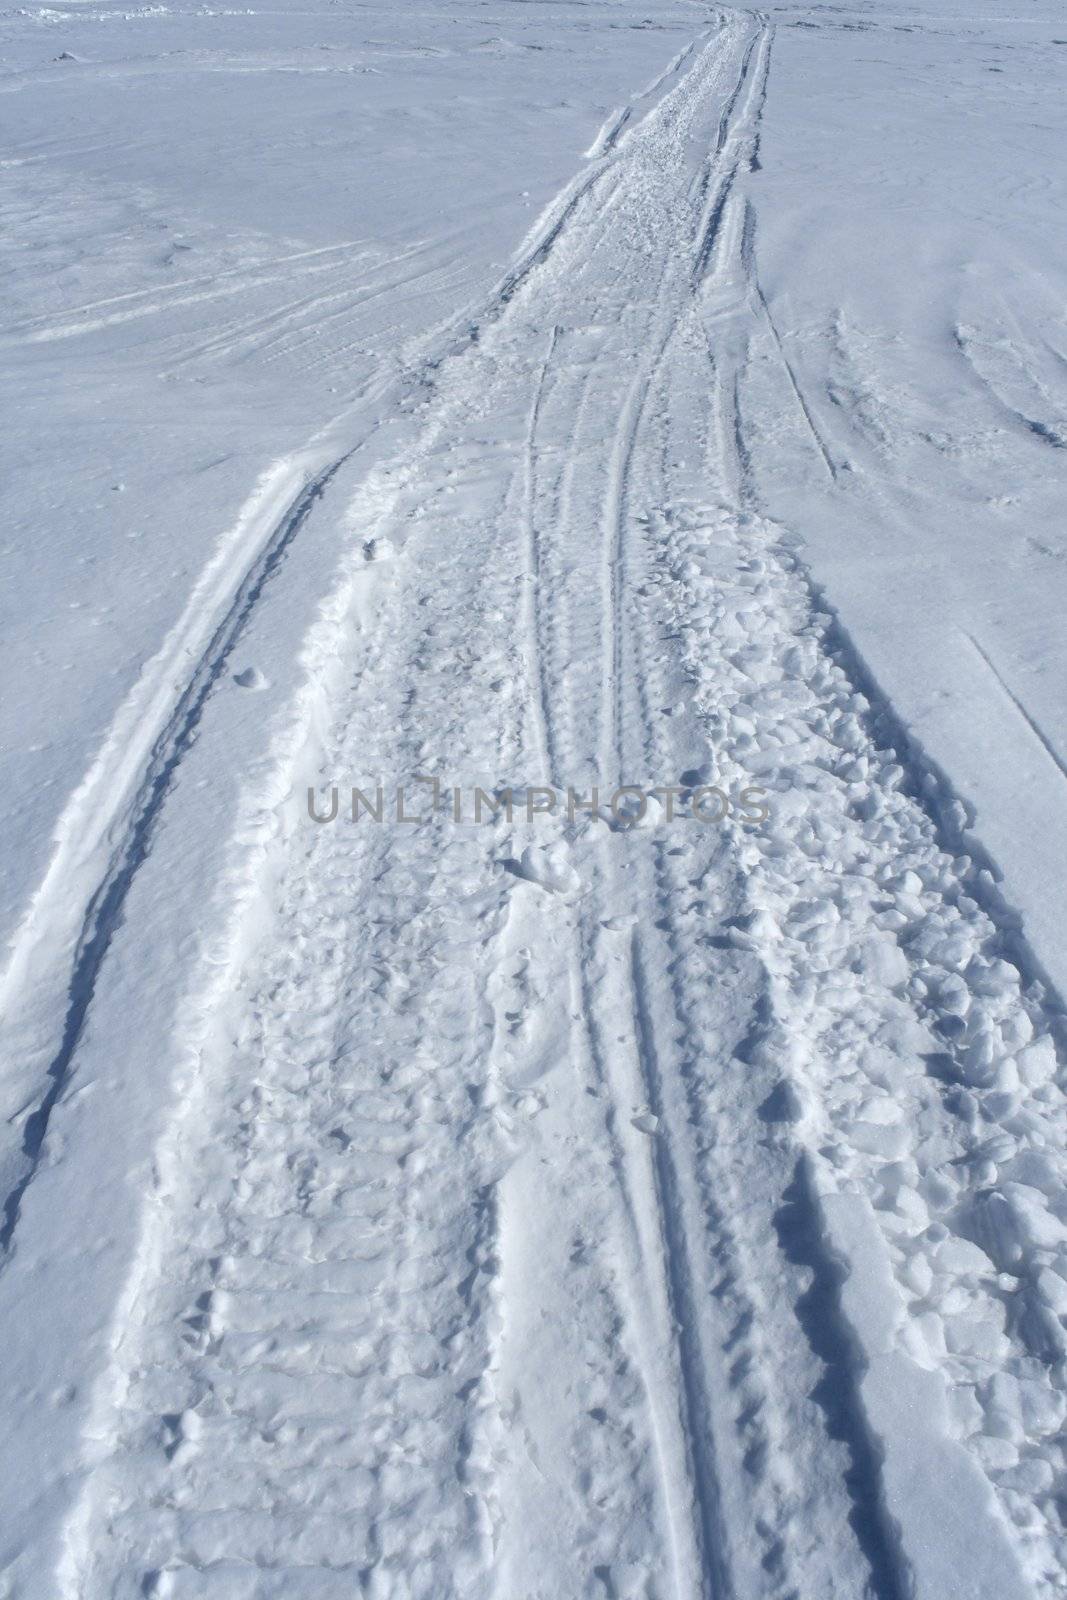 Skidoo track in the snow by anikasalsera